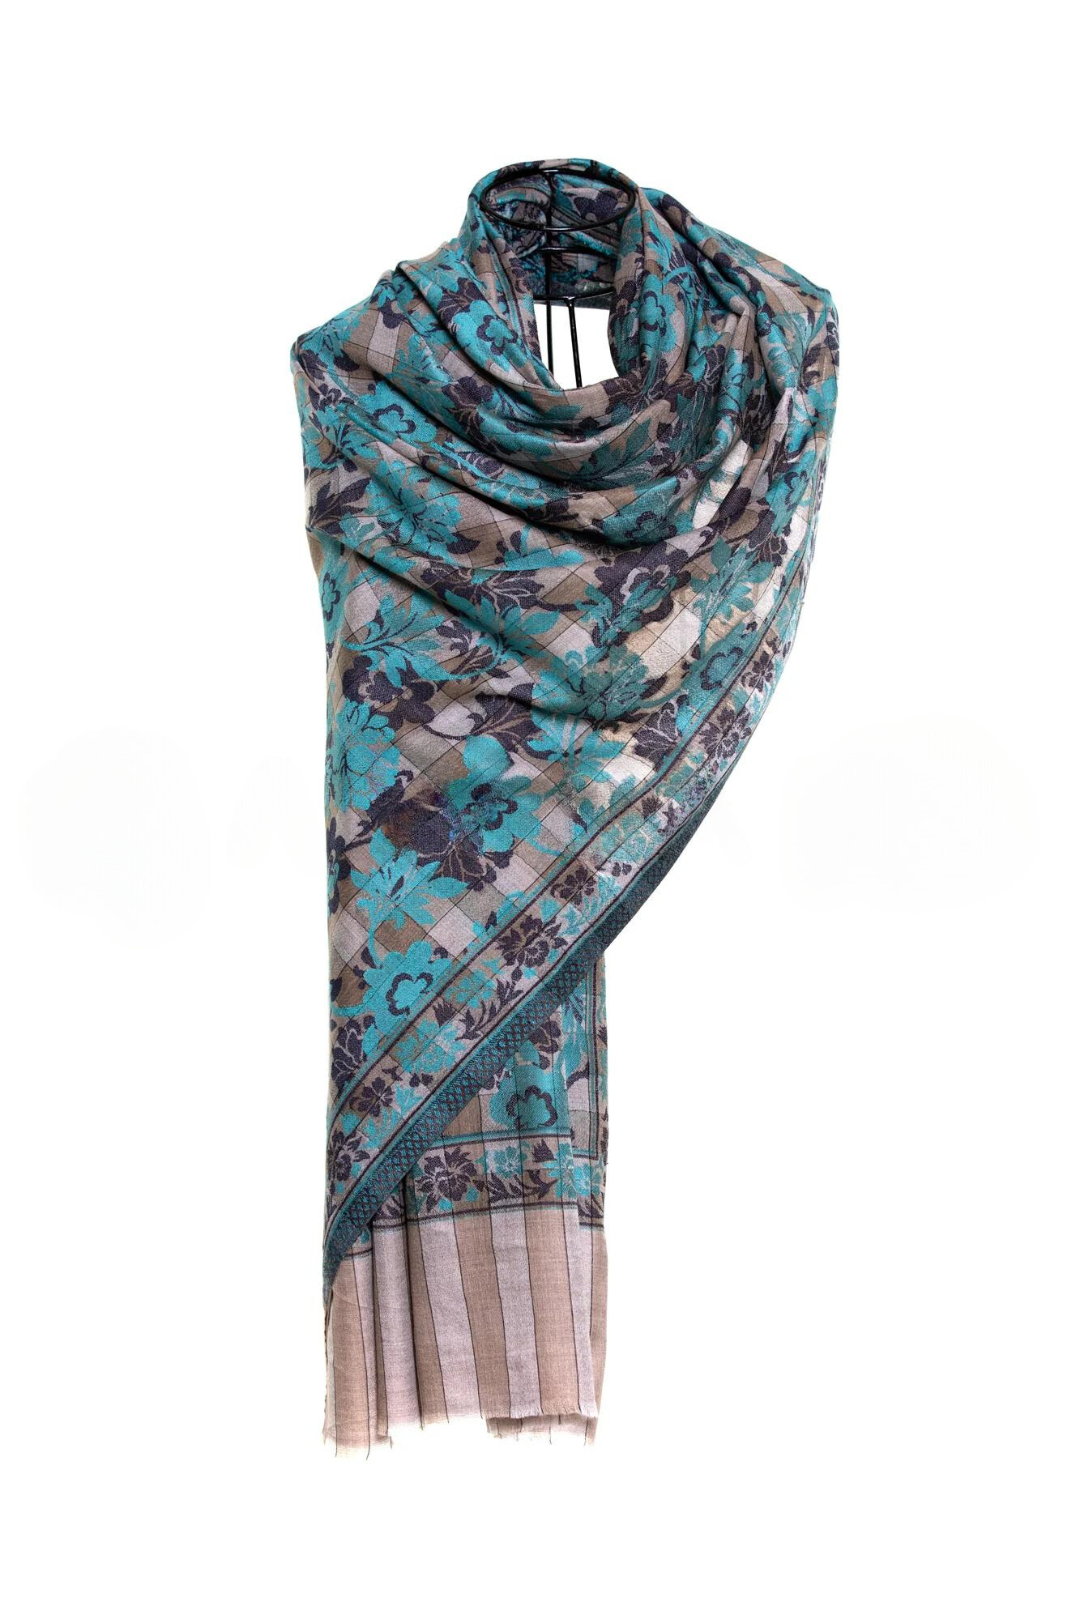 Checkers Floral Cashmere Pashmina Shawl - Turquoise